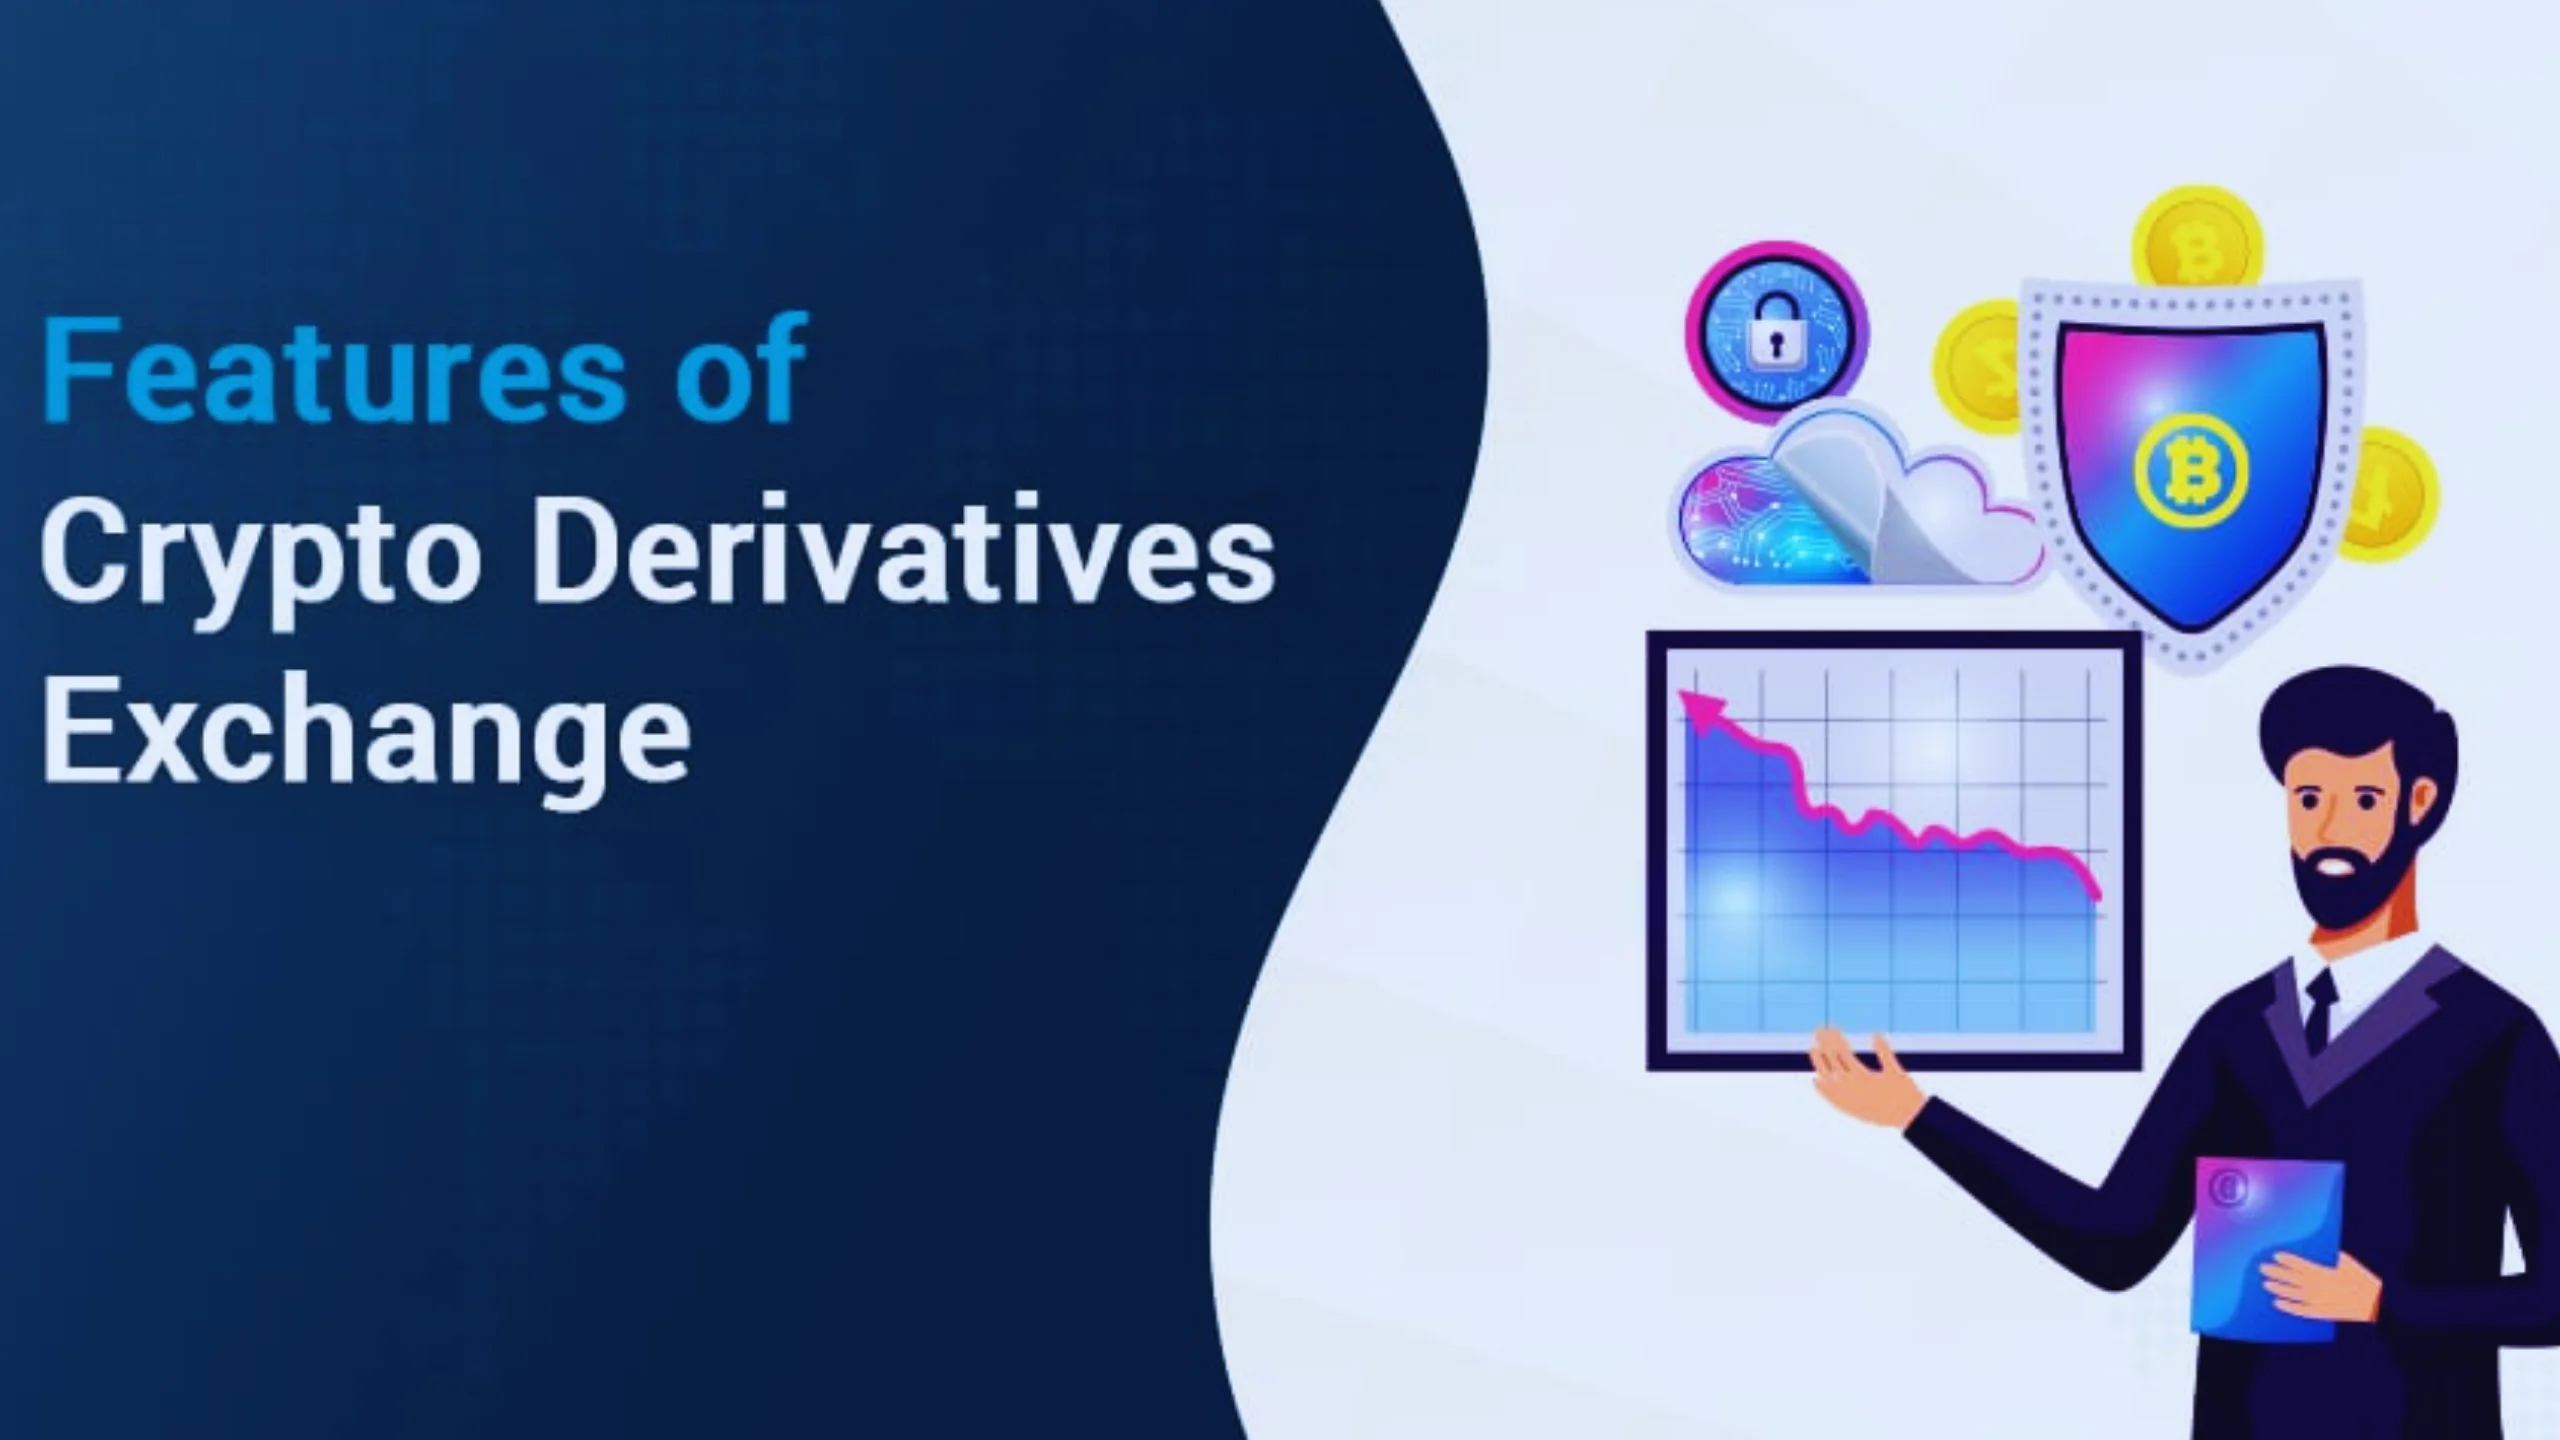 Explore the key features that make a crypto derivatives exchange stand out in the market.